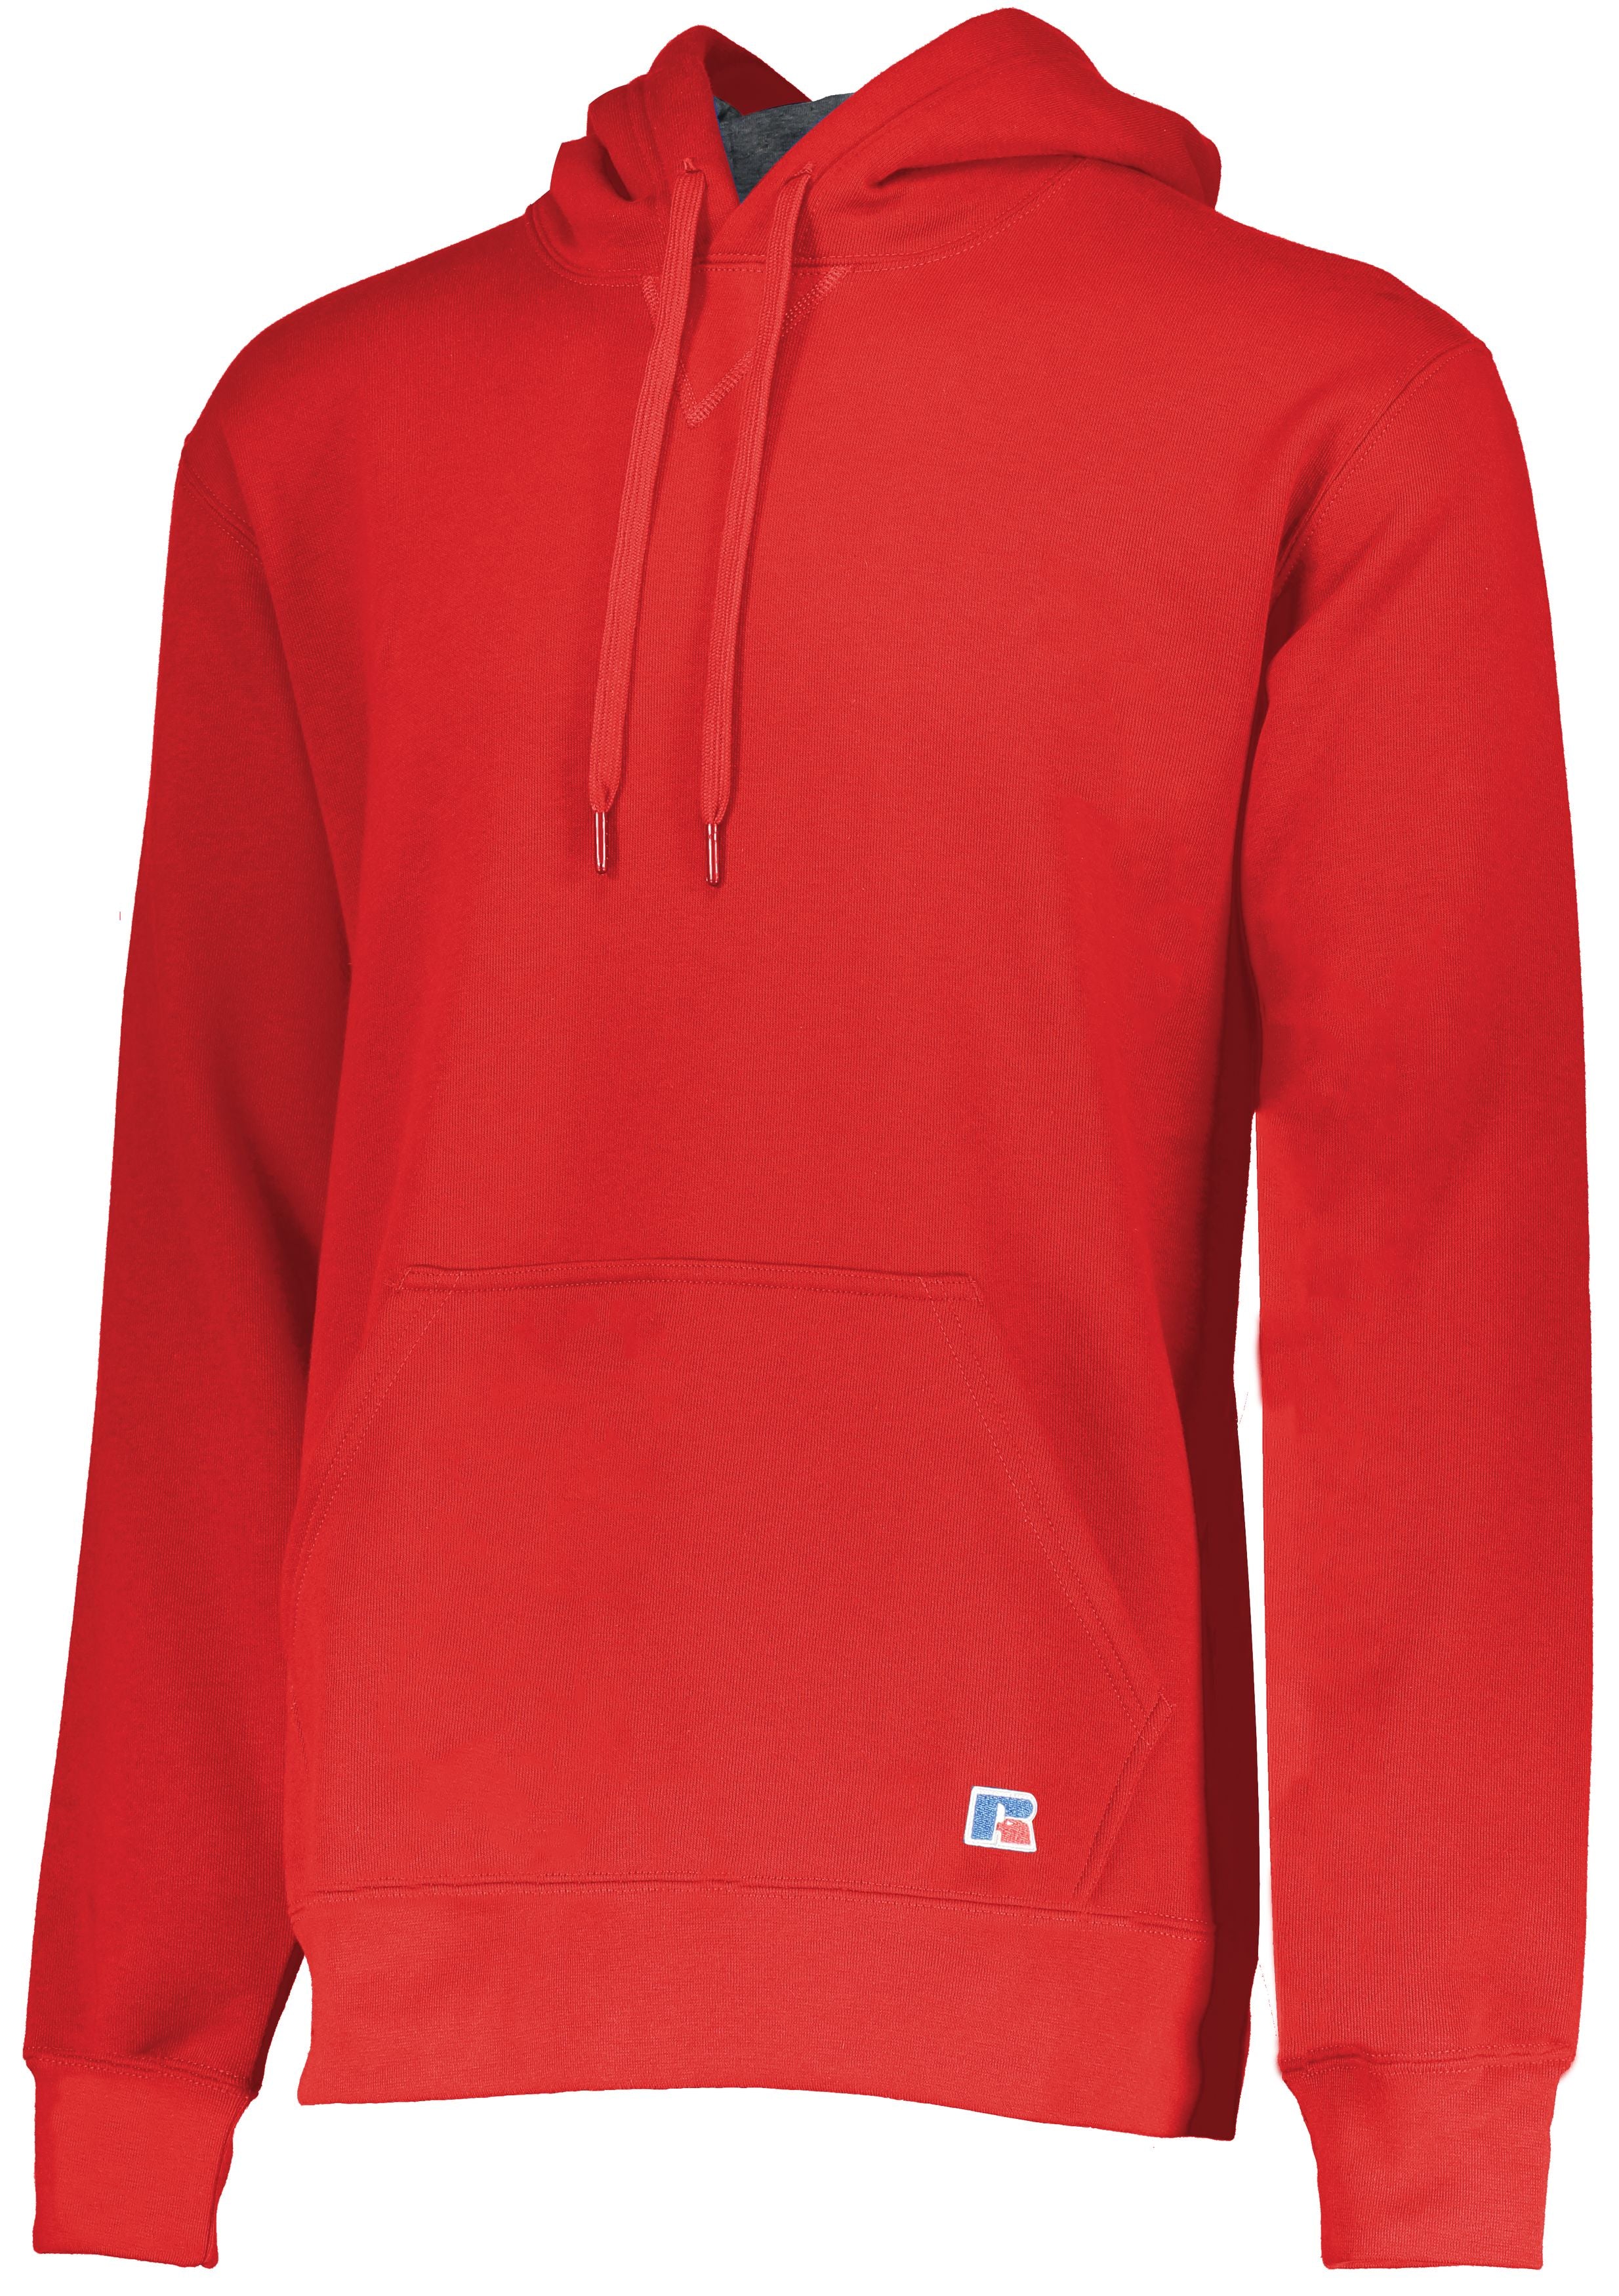 Russell Athletic 80/20 Fleece Hoodie in True Red  -Part of the Adult, Russell-Athletic-Products, Shirts product lines at KanaleyCreations.com